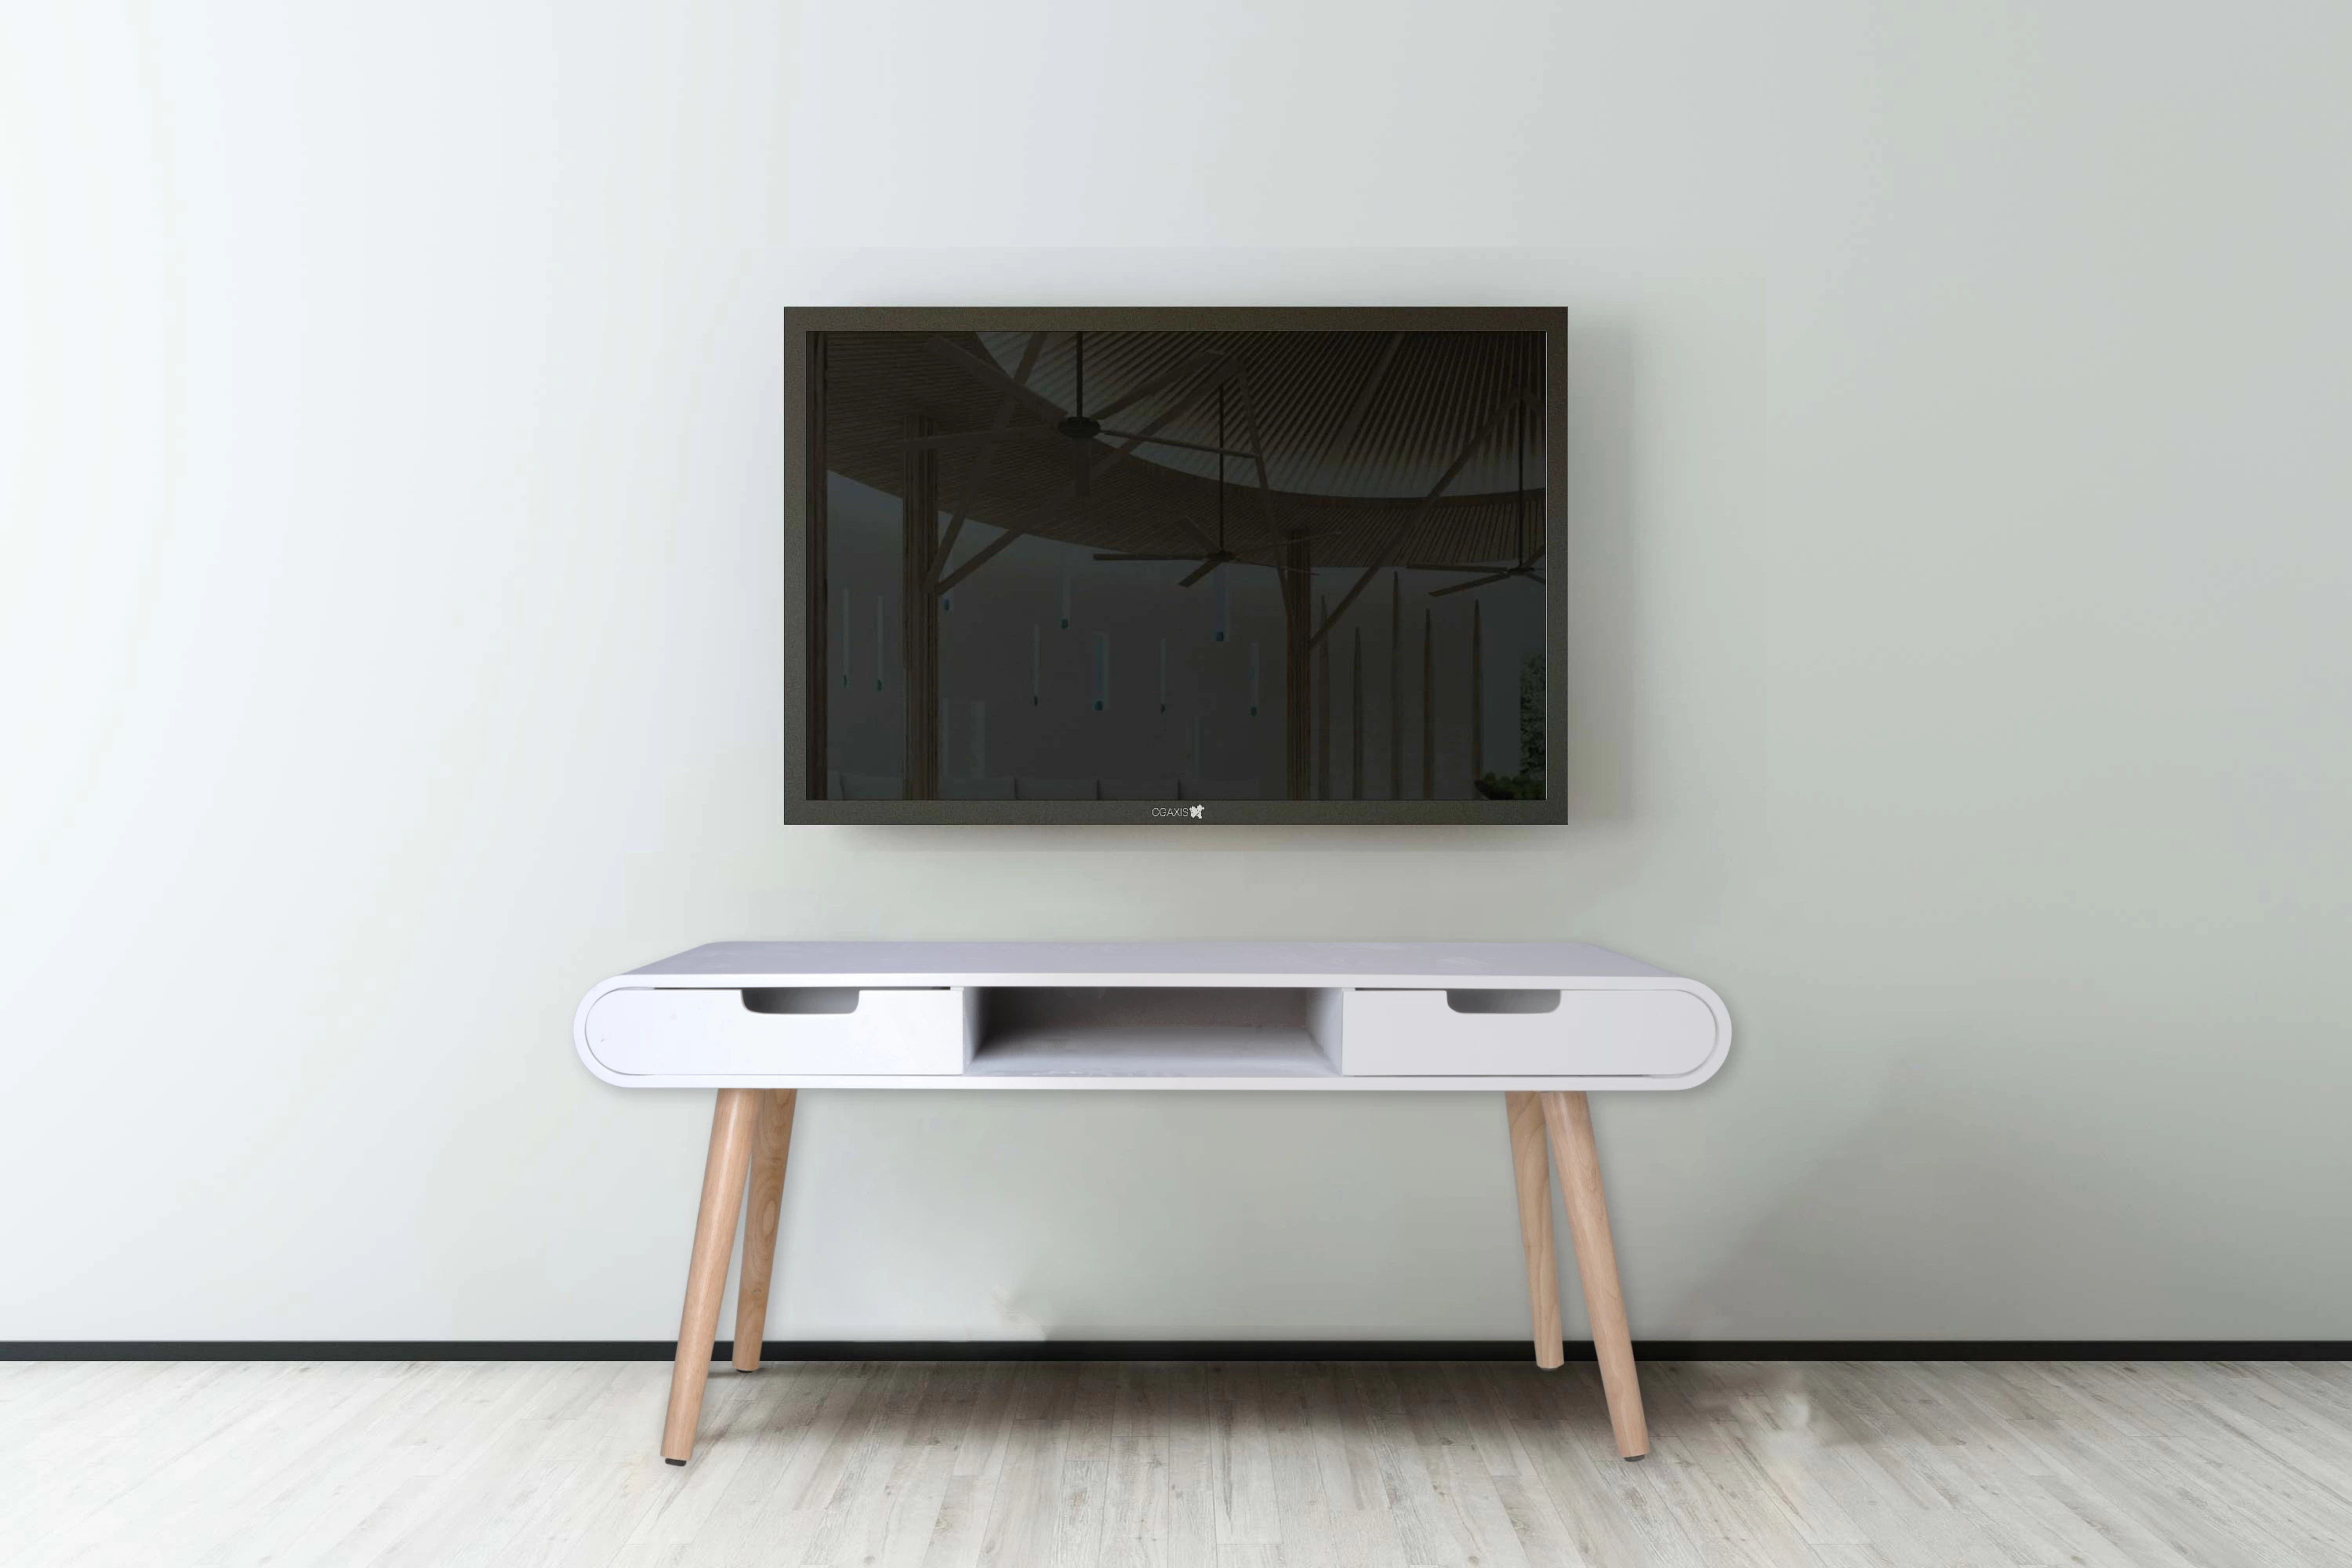 Wholesale Oval shap TV cabinet /Coffee table can be customized according to the height you need